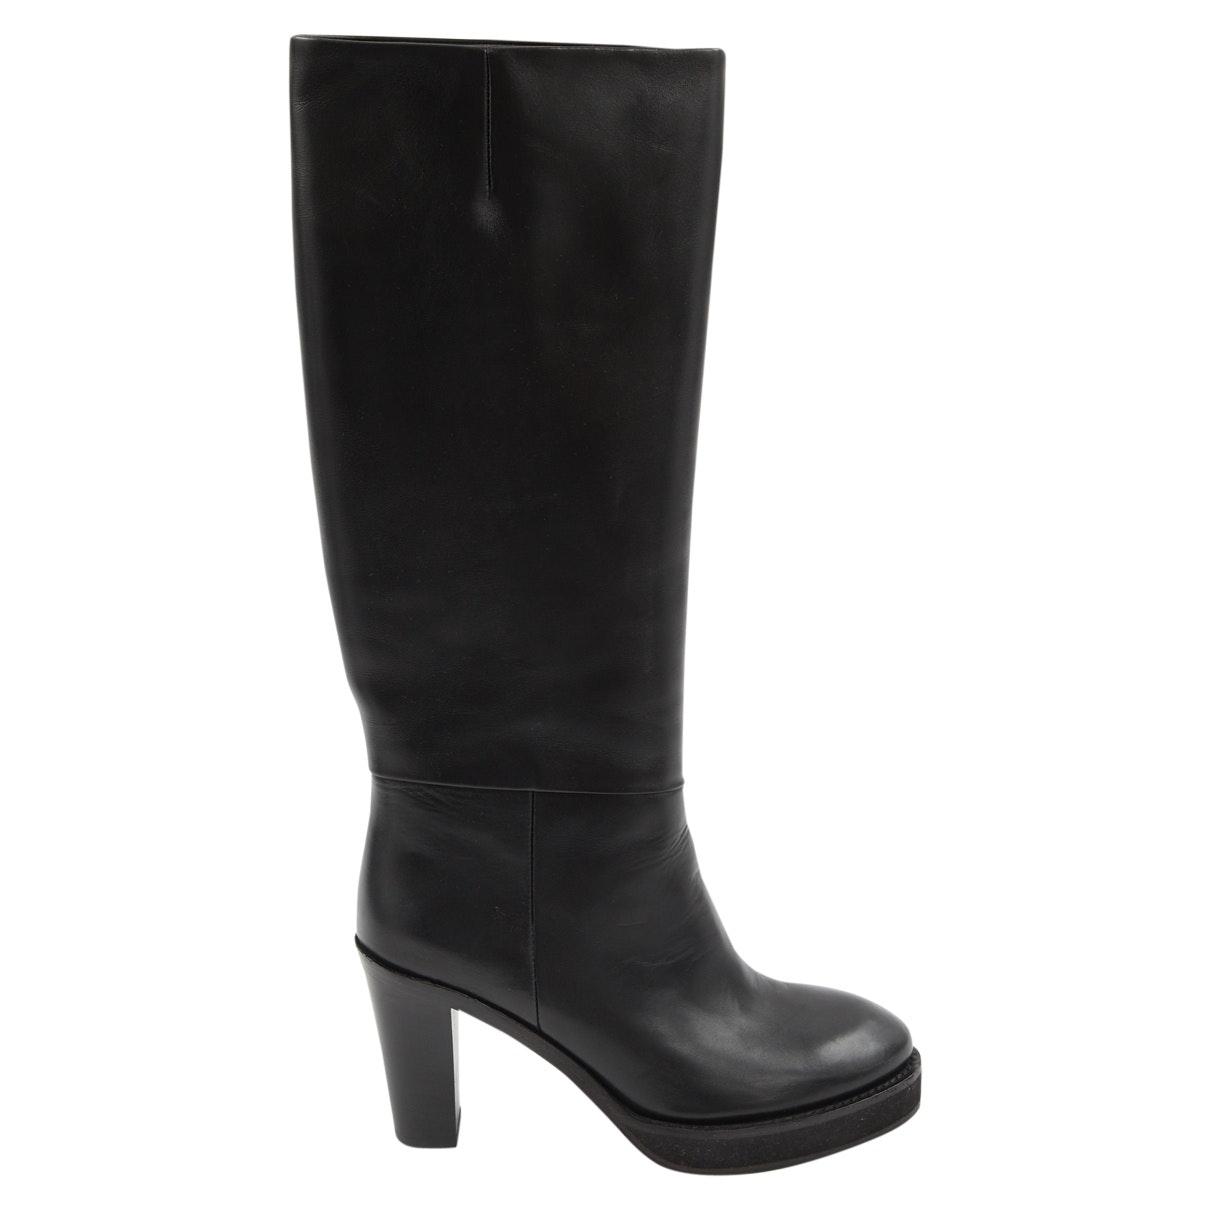 Acne Studios Black Leather Boots - Lyst